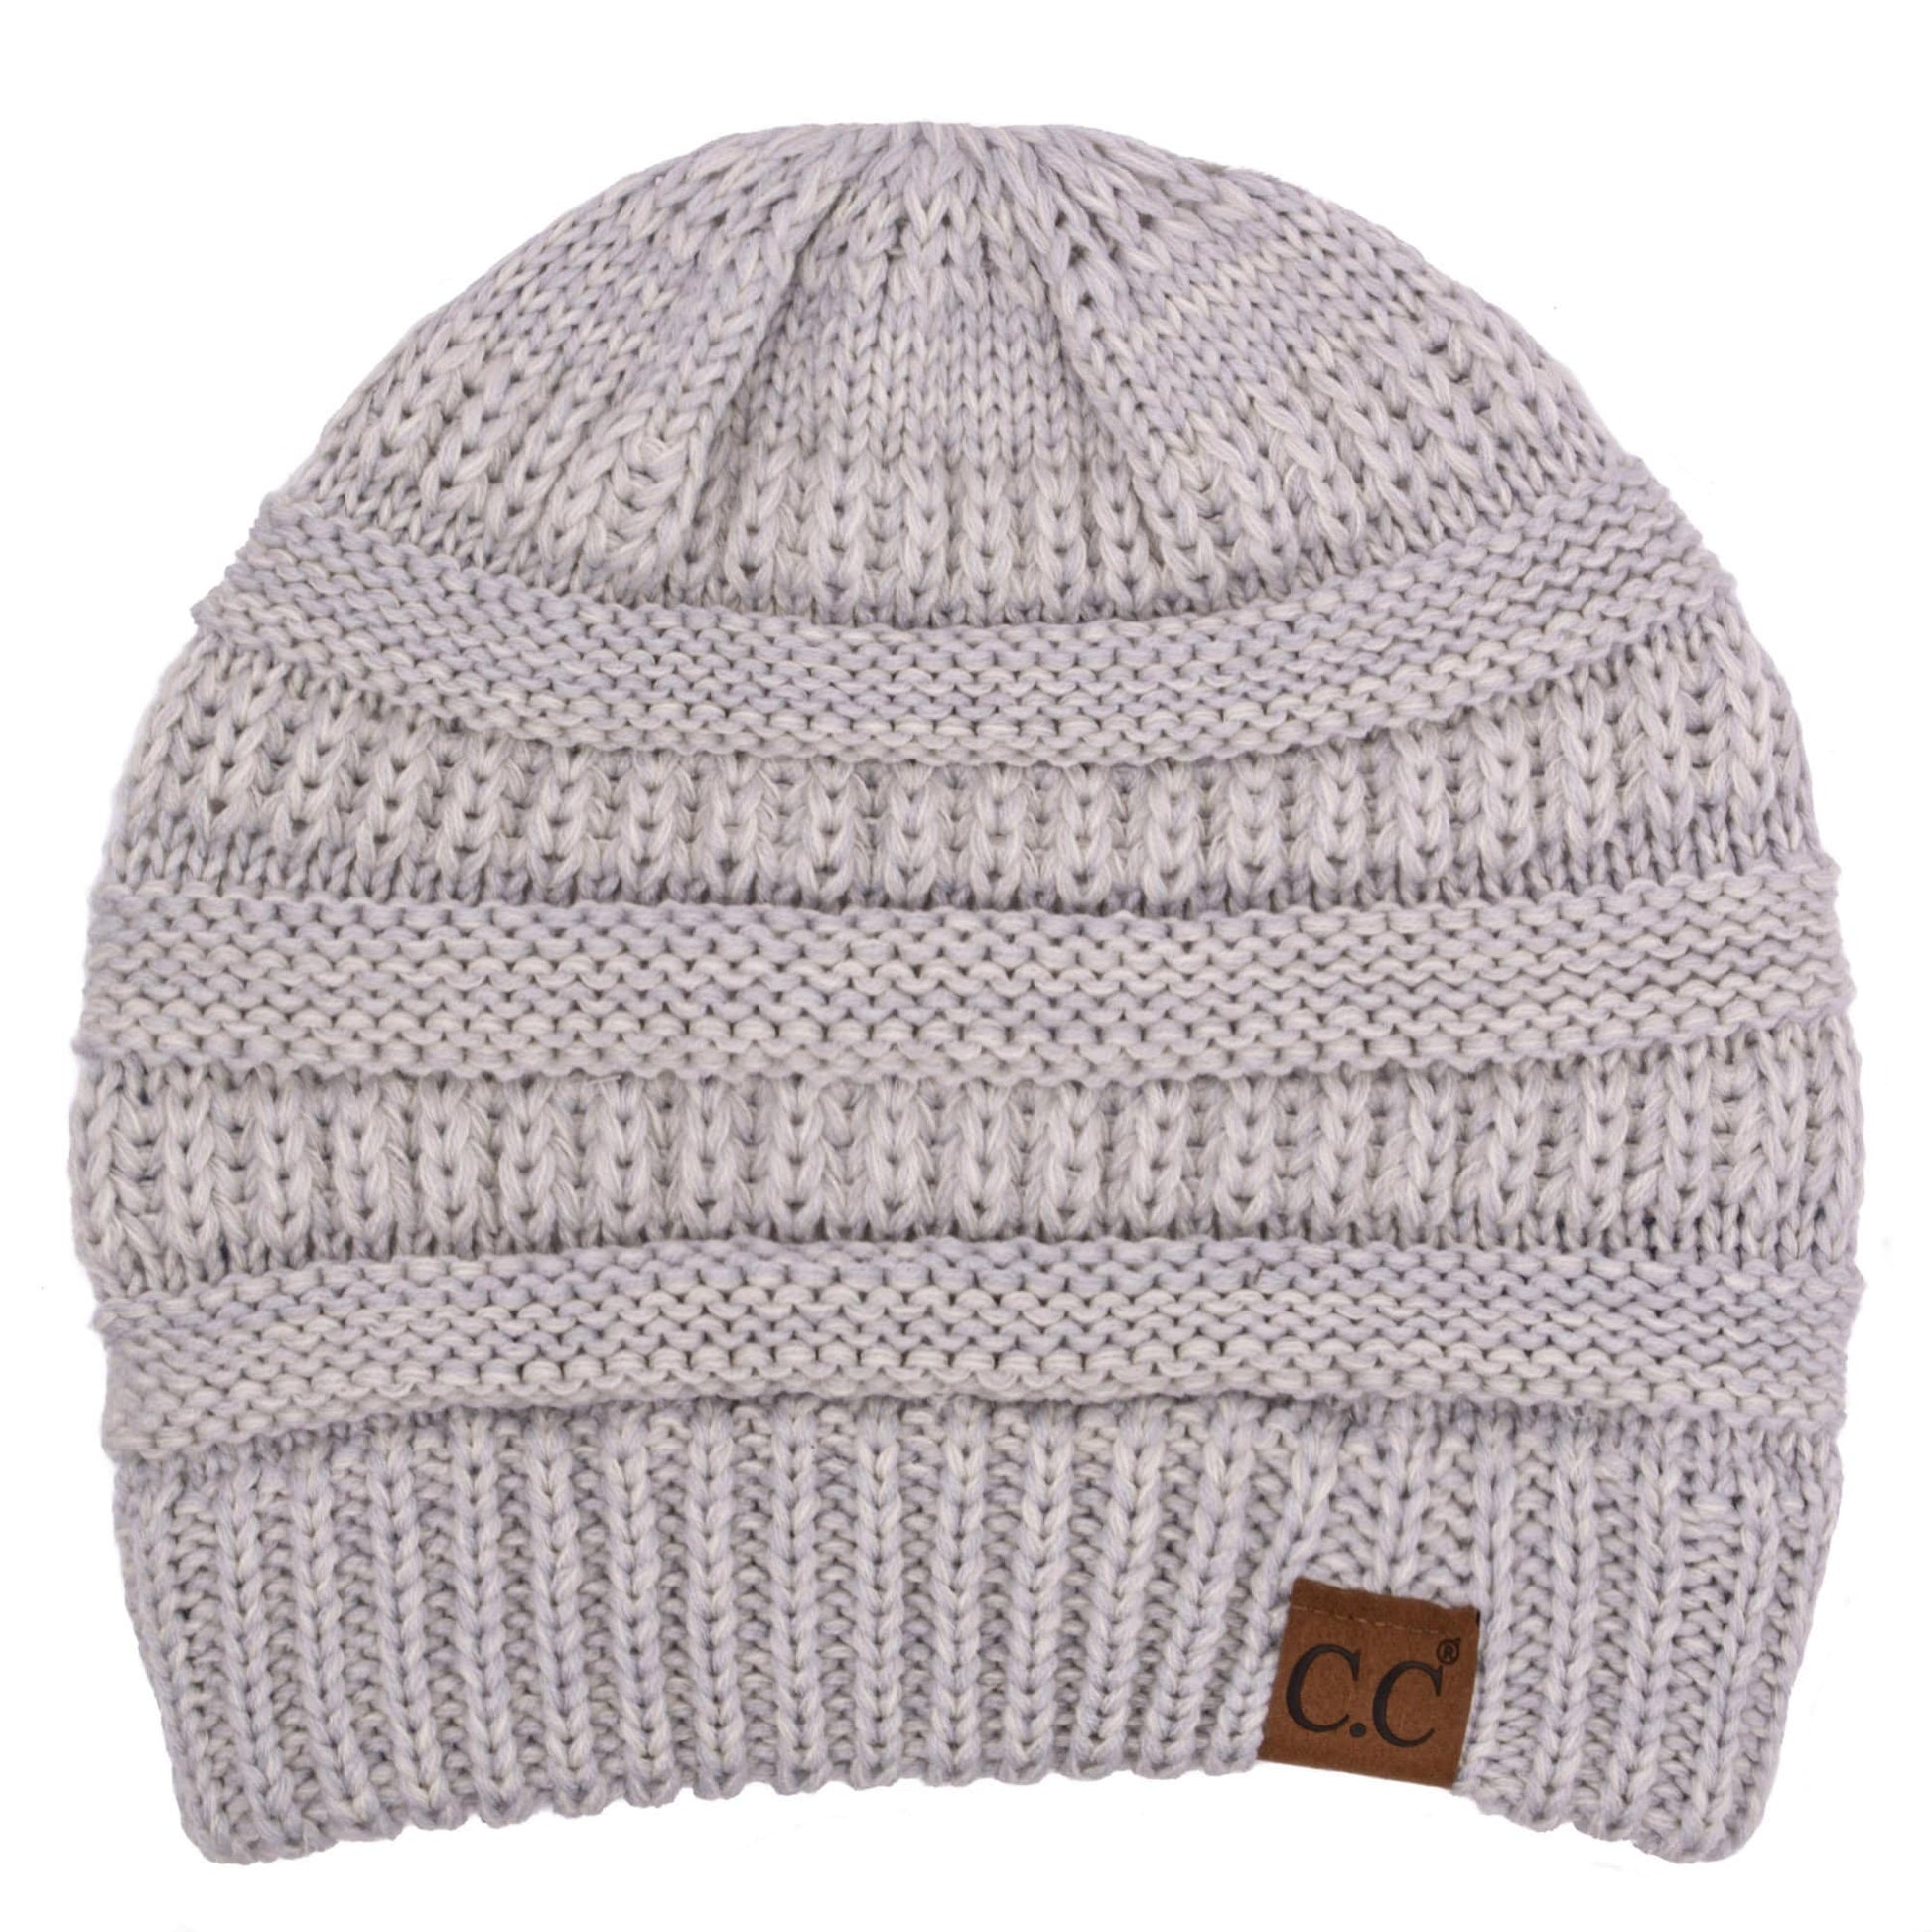 C.C Apparel Two Tone Lt. Grey C.C Trendy Warm Chunky Soft Stretch Two-Toned Cable Knit Beanie Skully